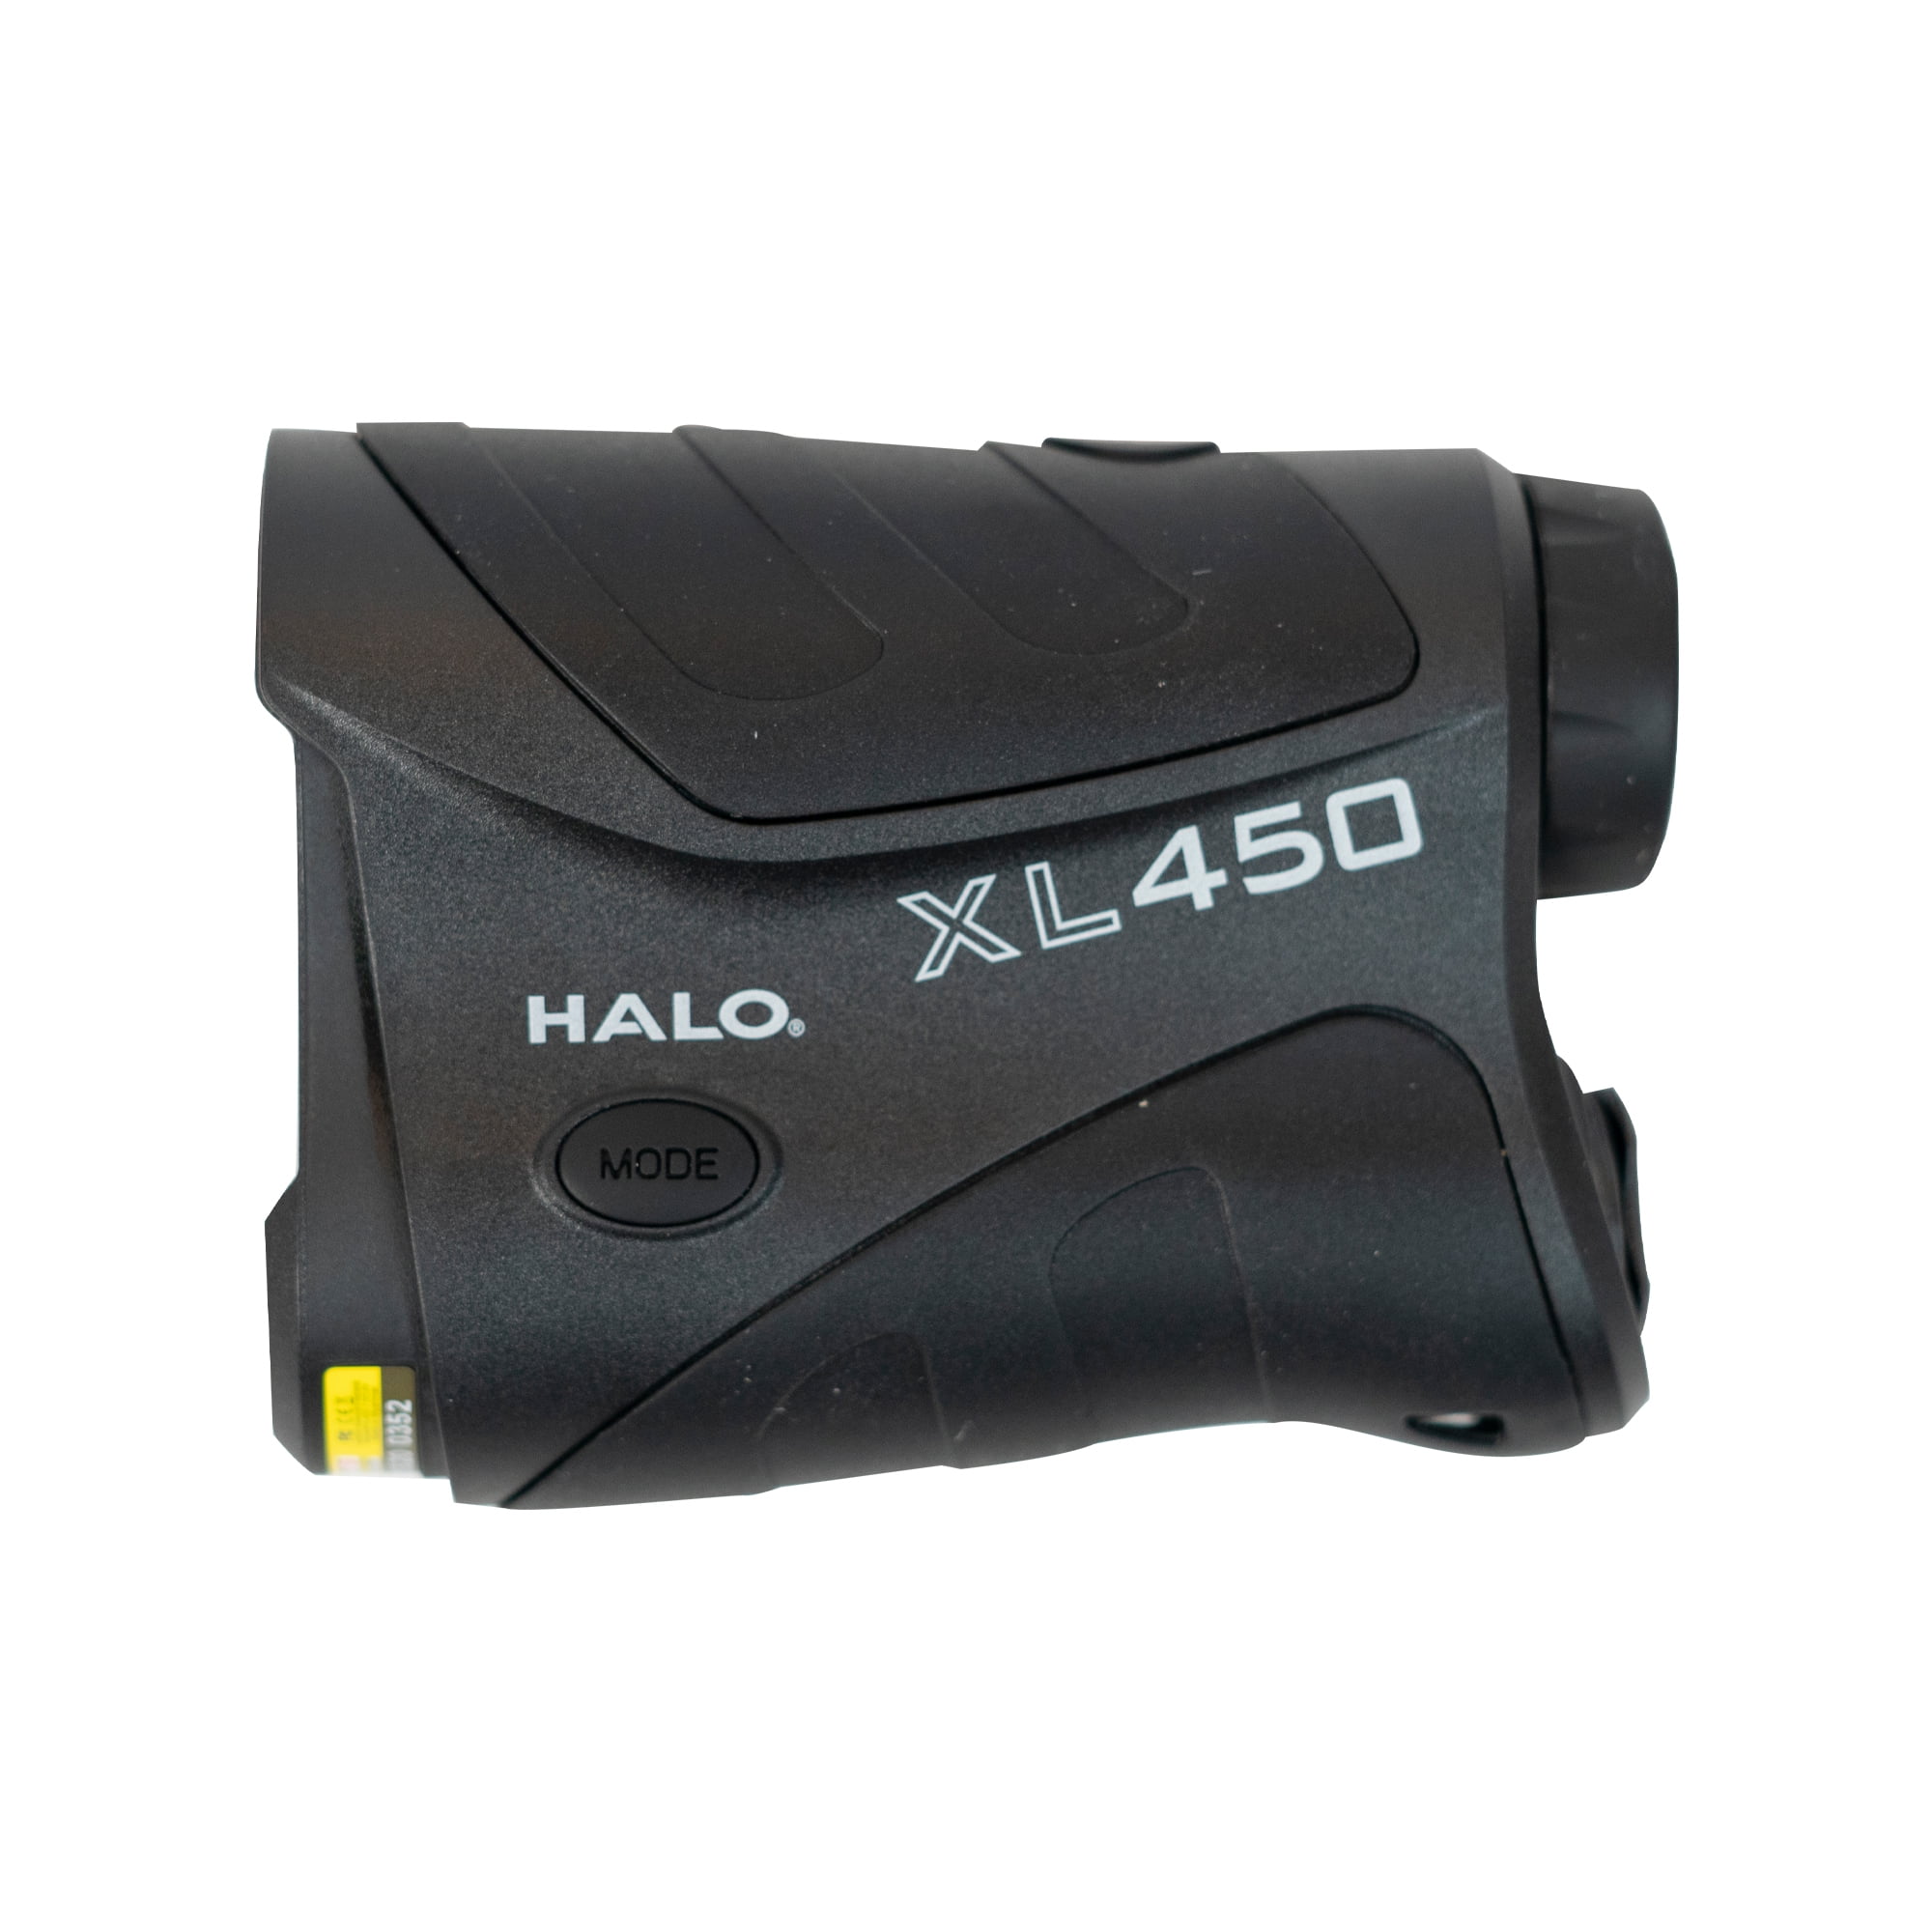 Aenllosi Hard Carrying Case Compatible with Halo XL450 Range Finder 